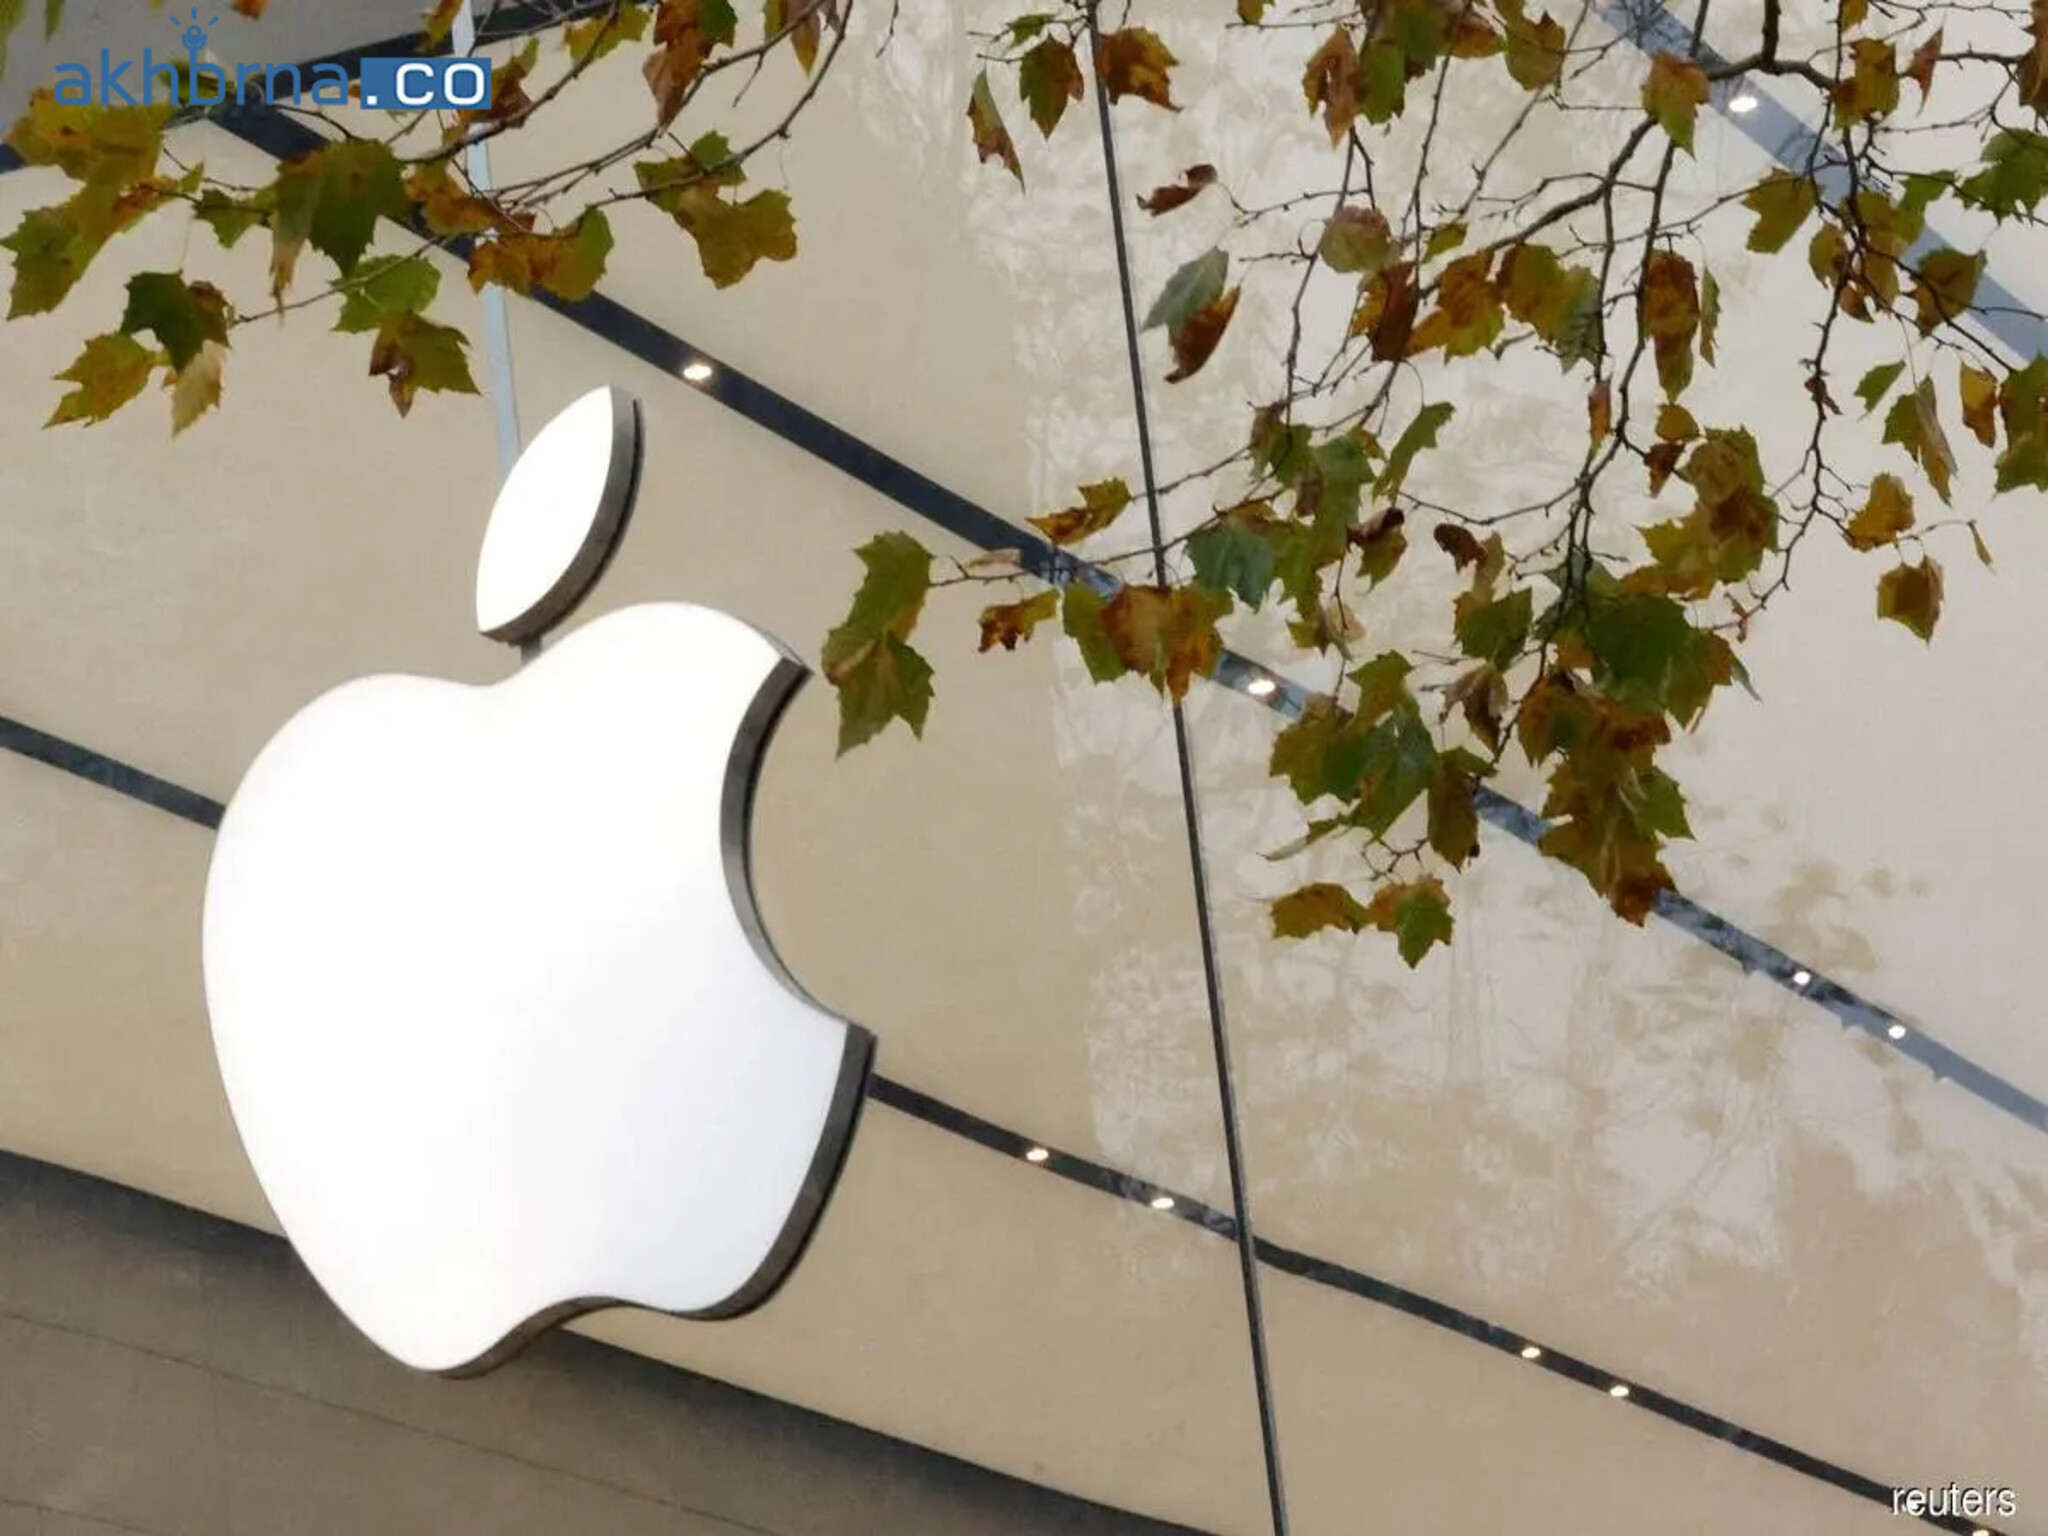 Apple accused of violating EU tech regulations, and other additional breaches